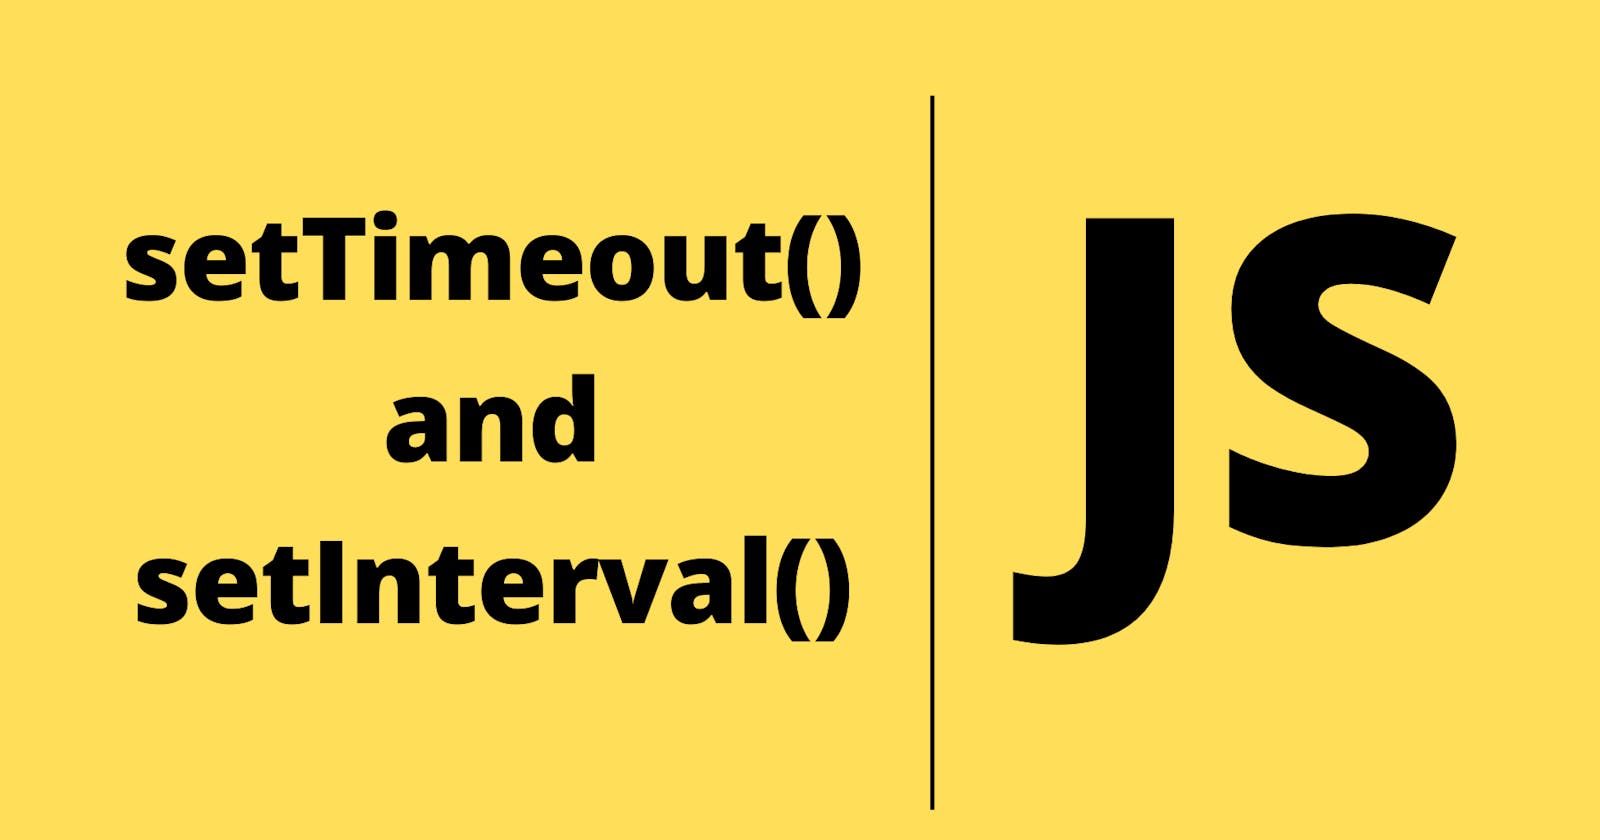 Scheduling: setTimeout() and setInterval() in JS